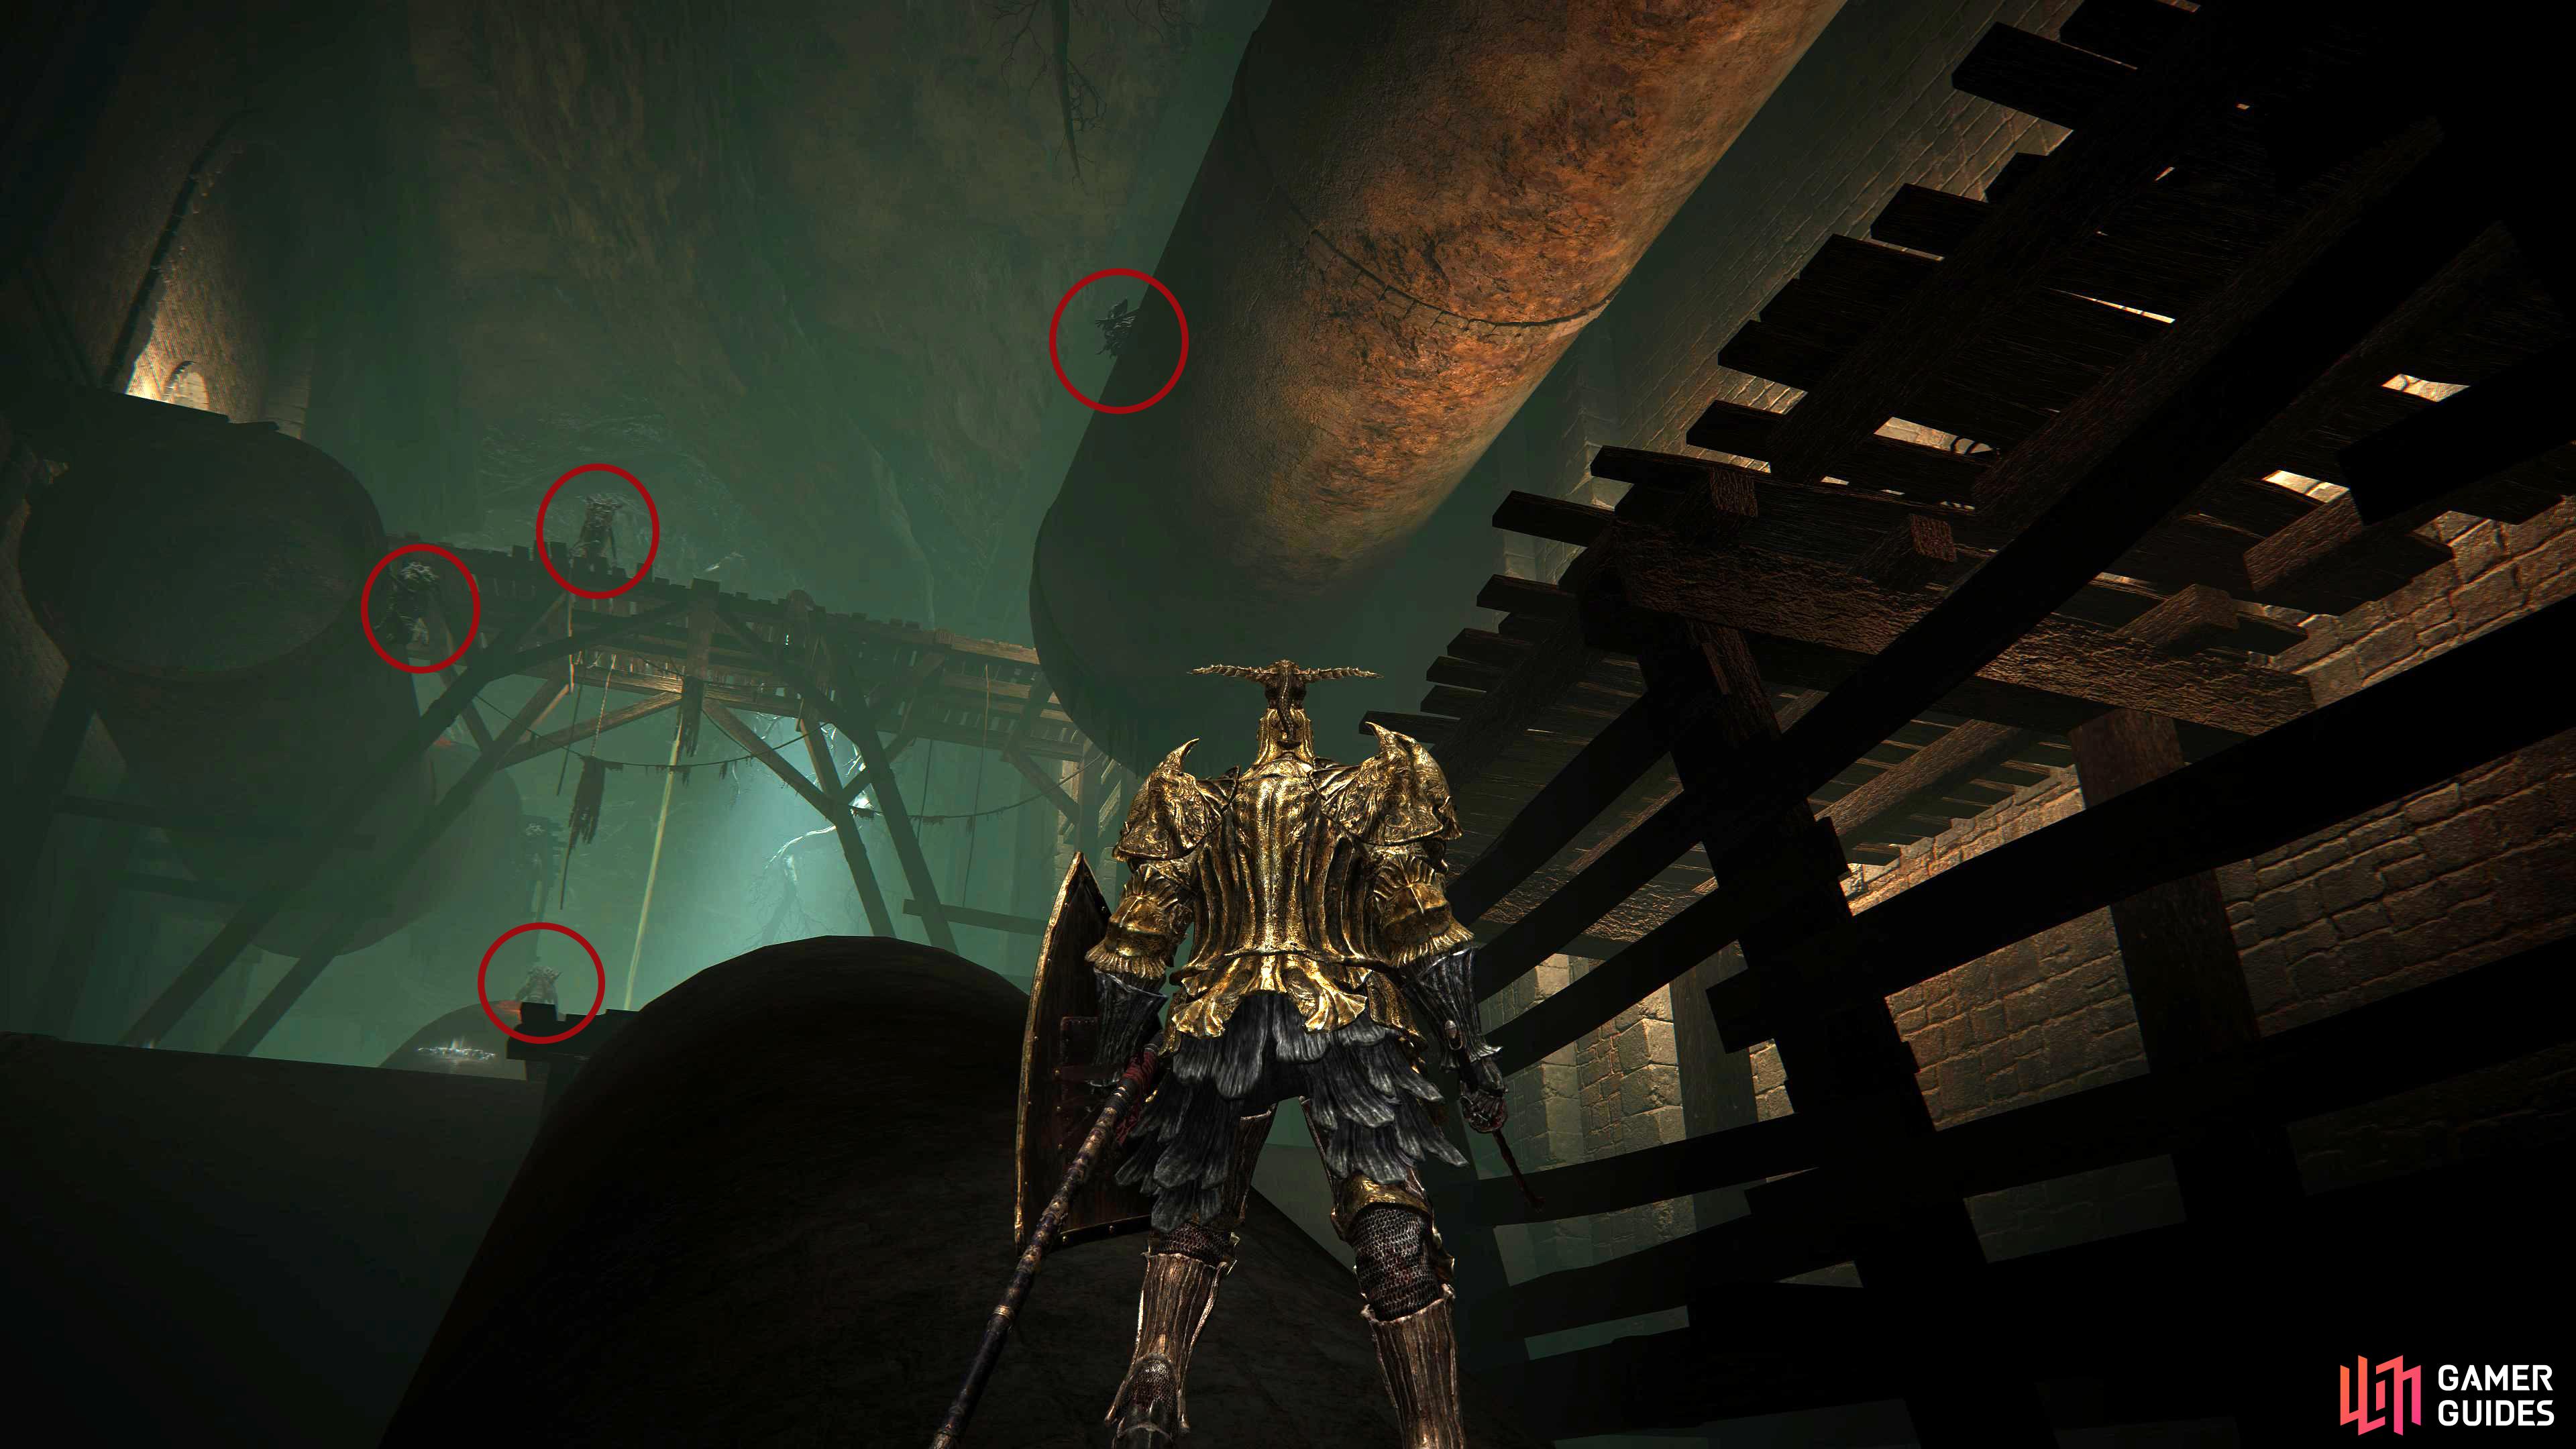 If you ignore the imps hanging on the pipes, you'll be ambushed by them as they come from behind.